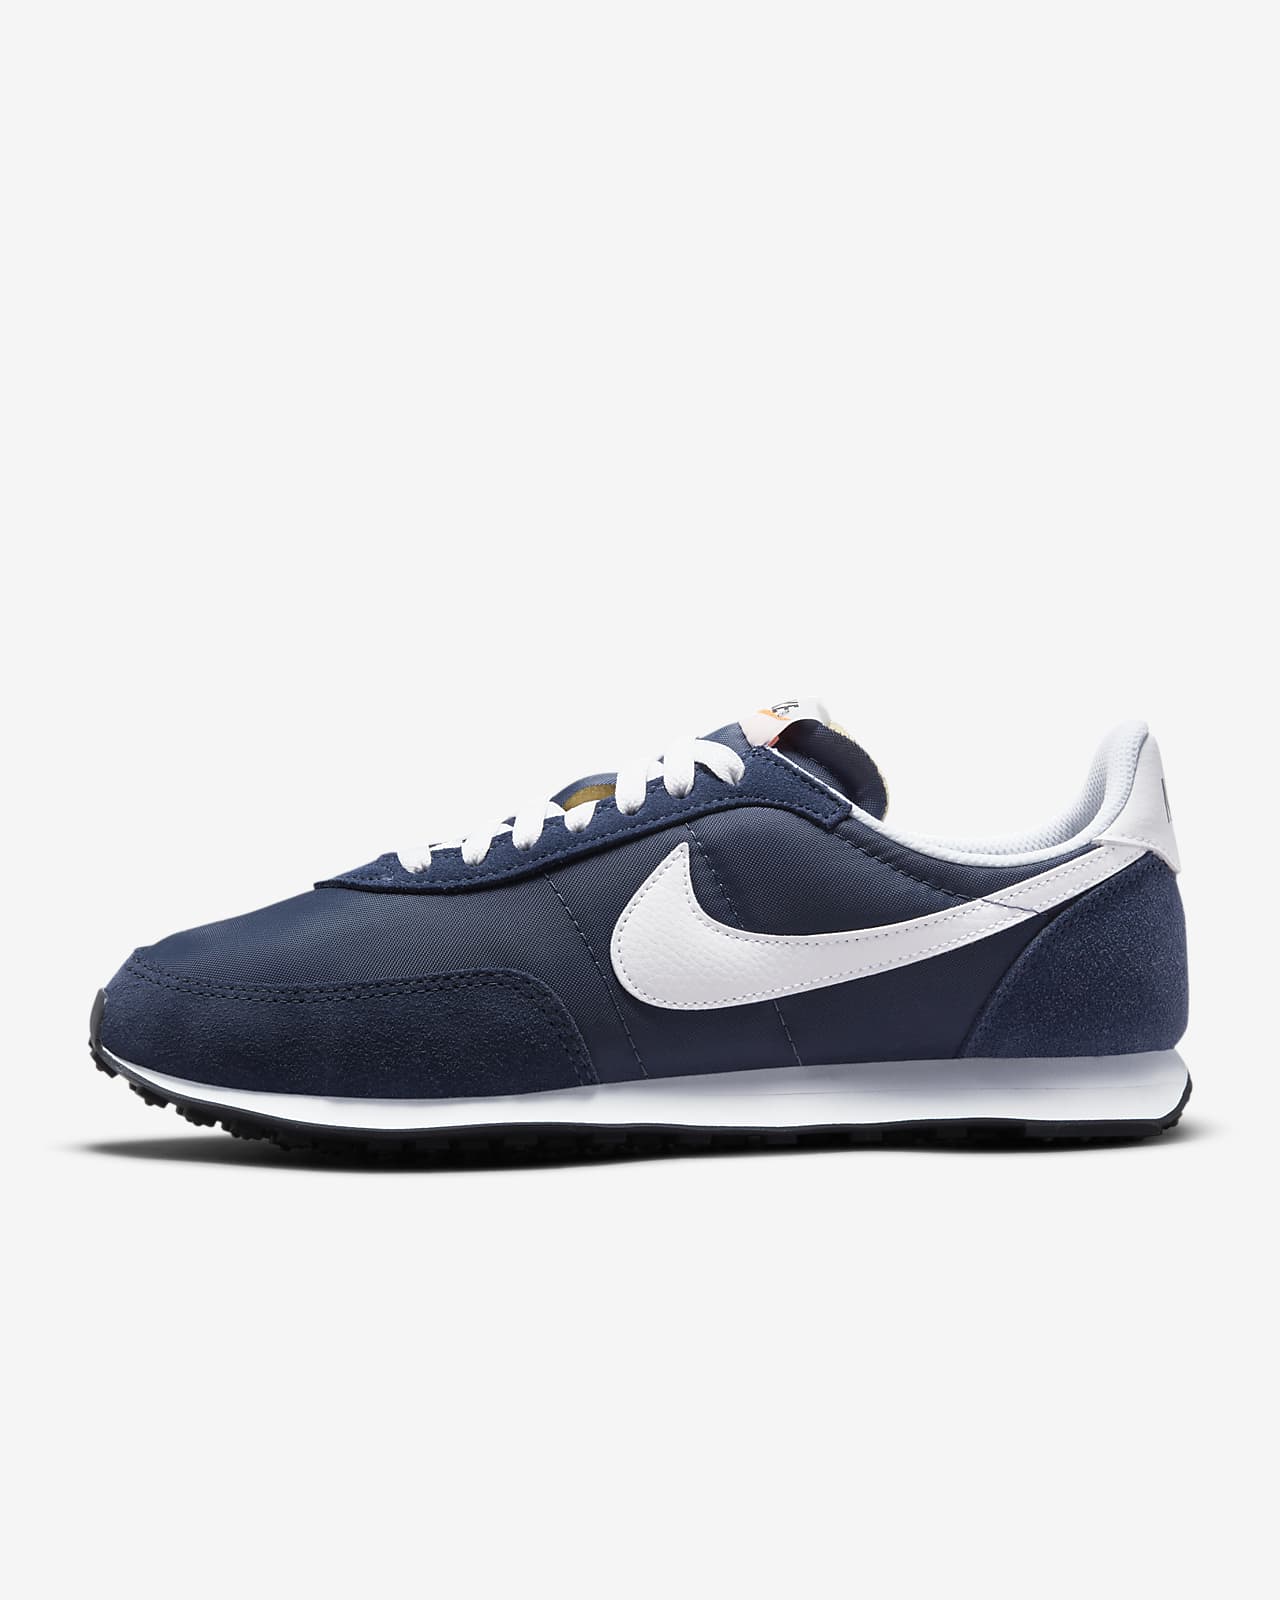 Chaussure Nike Waffle Trainer 2 pour homme